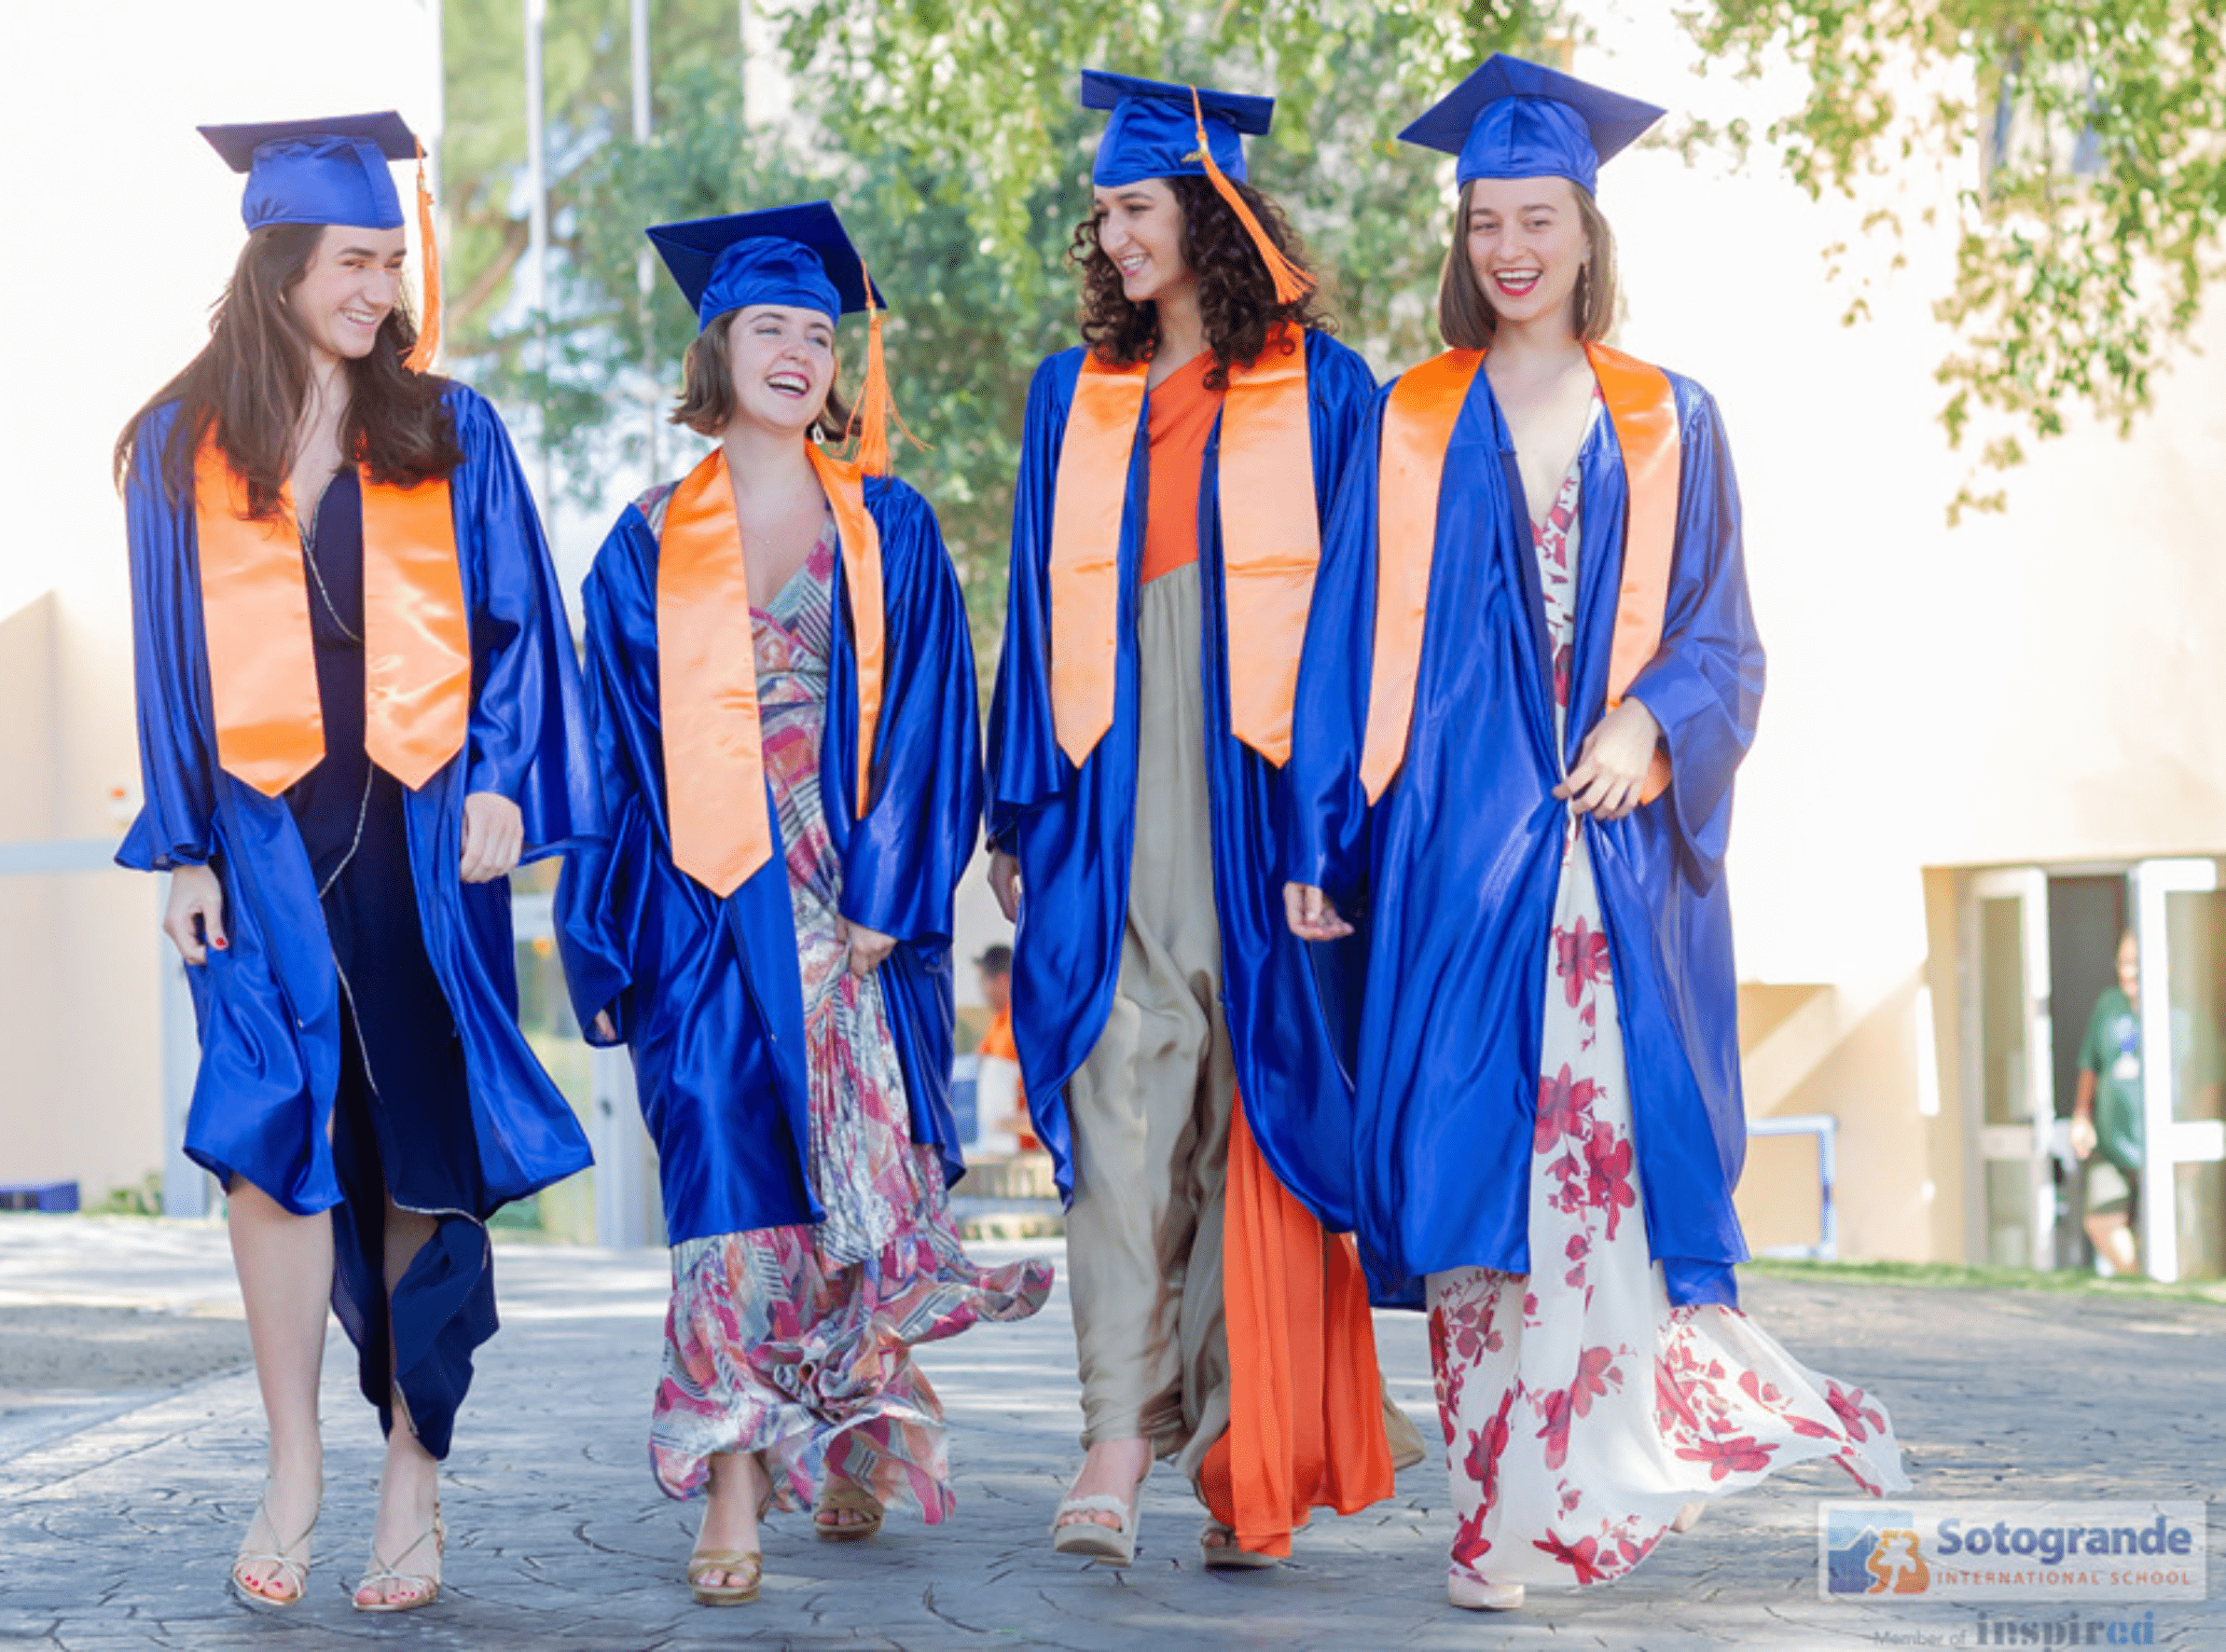 A group of female graduates celebrating their achievement after completing university, symbolizing success and new beginnings in their academic journey within the vibrant community of Sotogrande Real Estate.